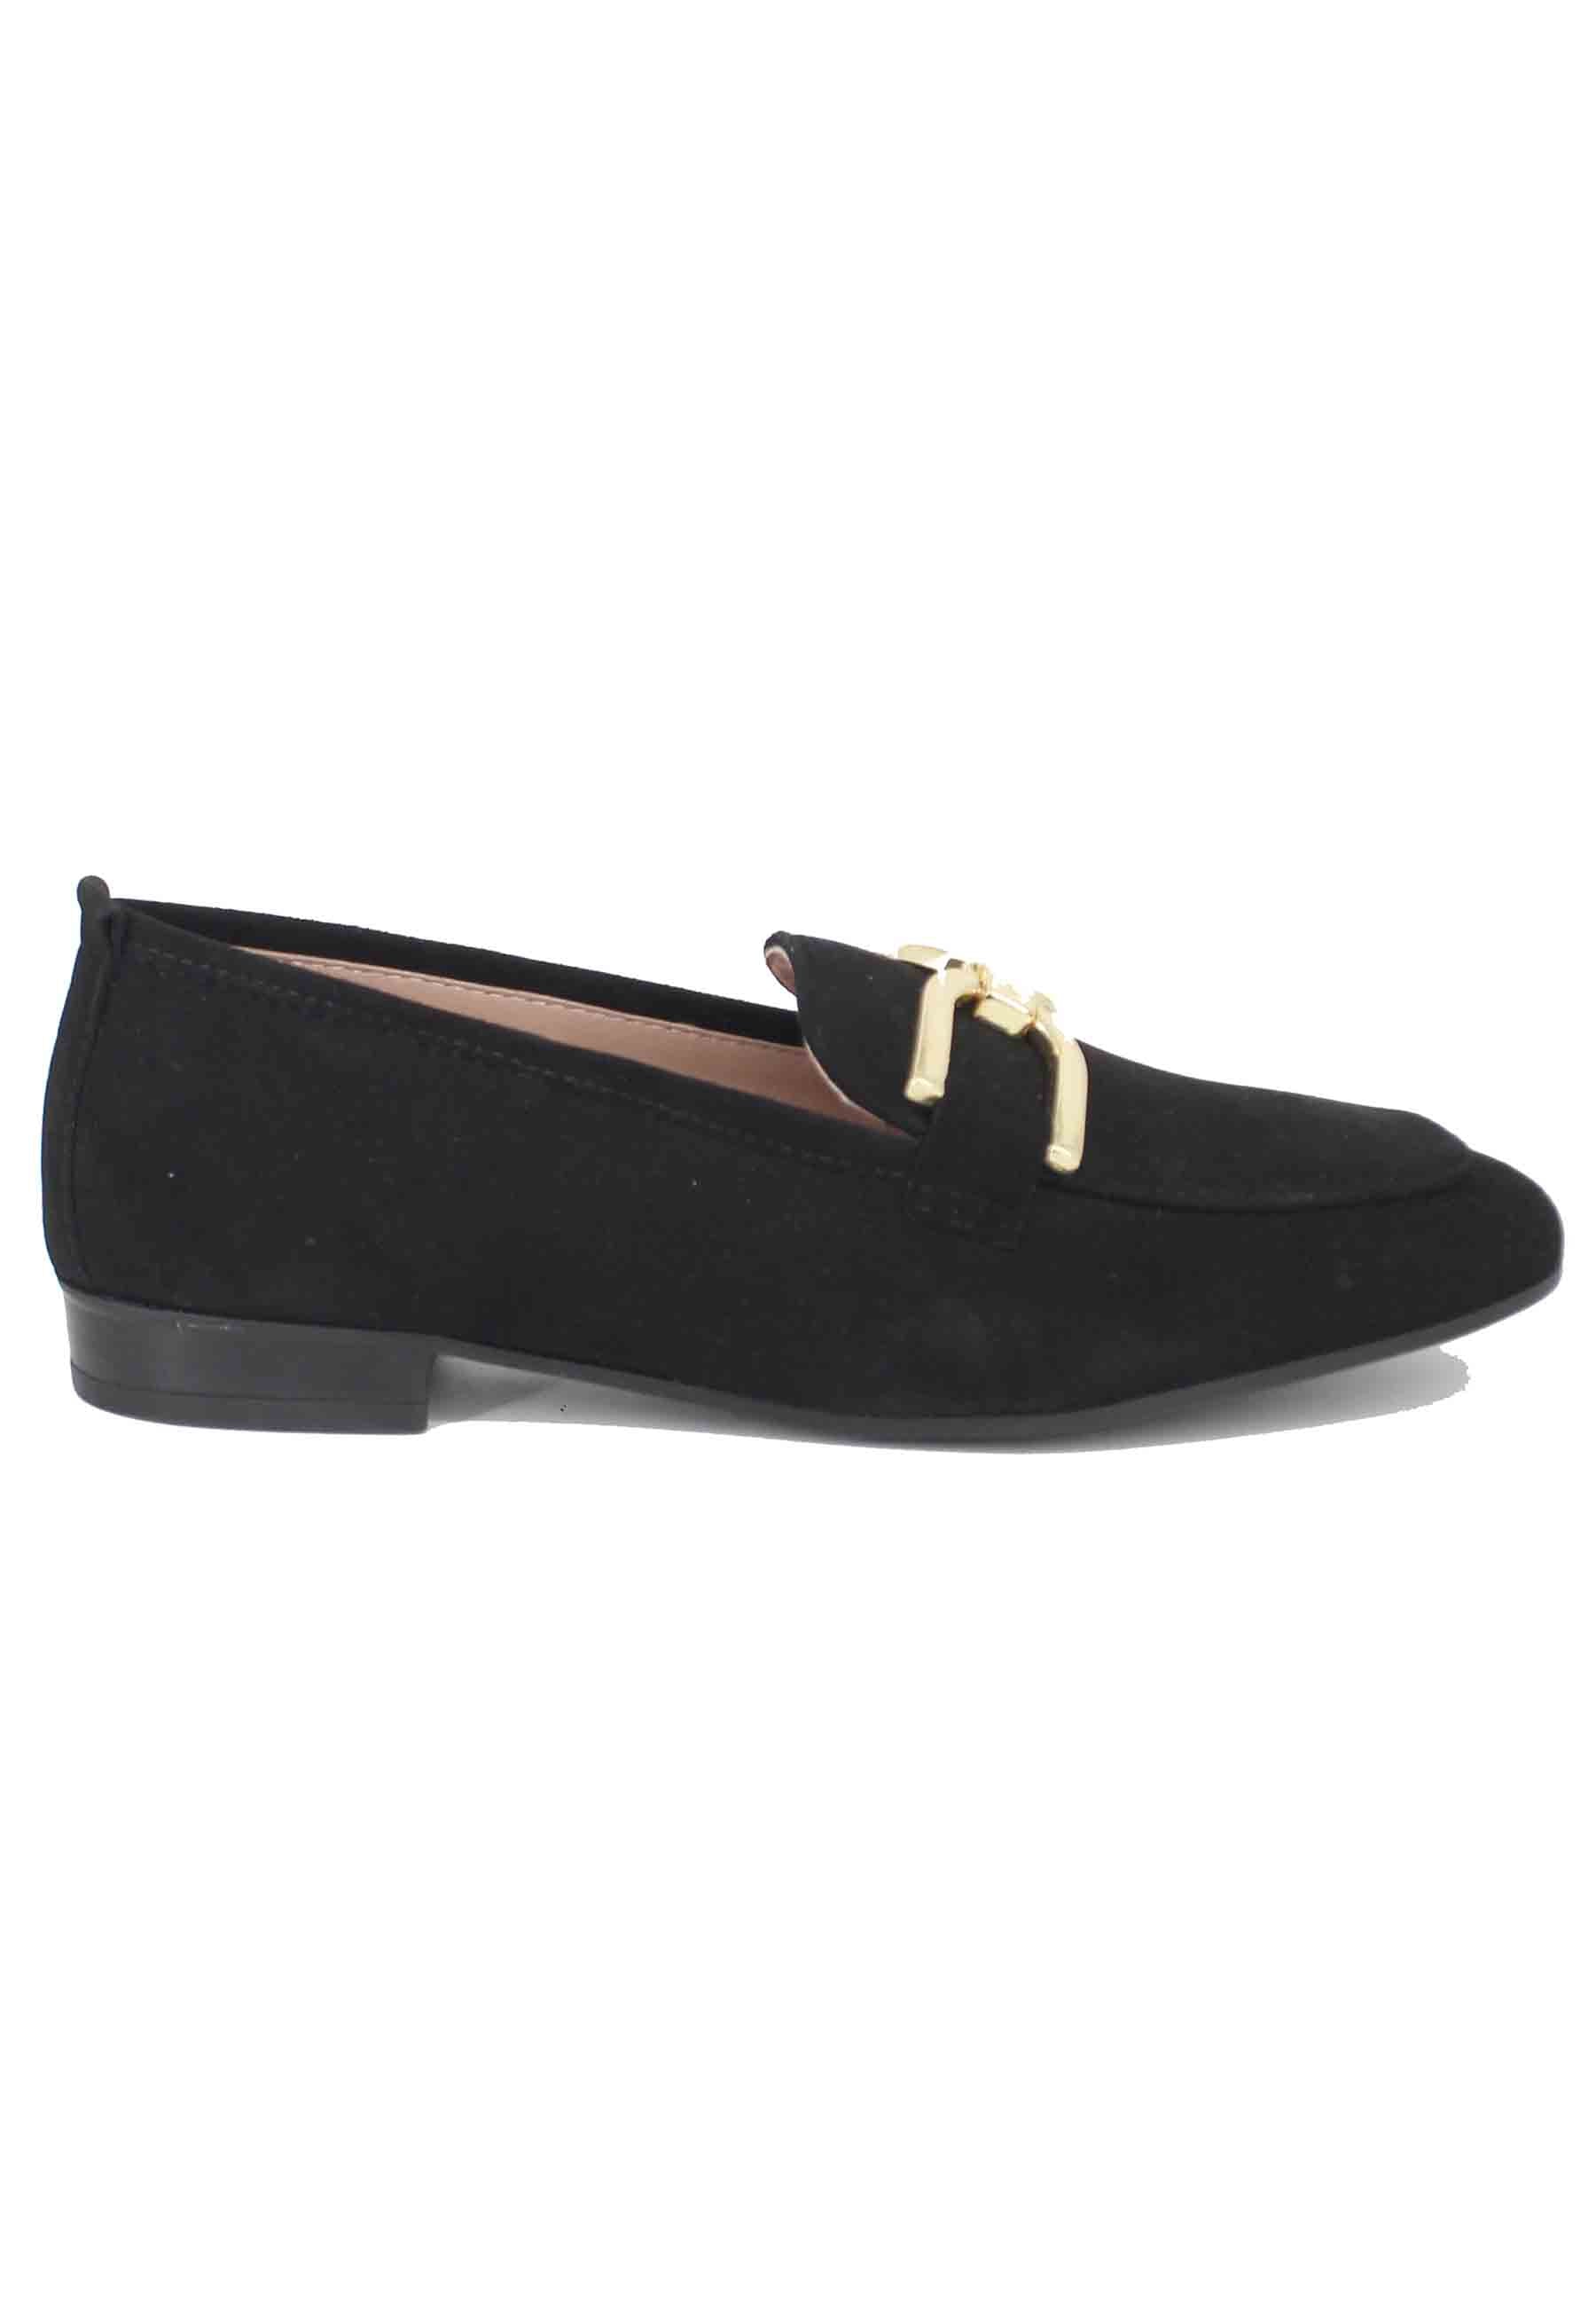 Women's black suede moccasins with gold horsebit